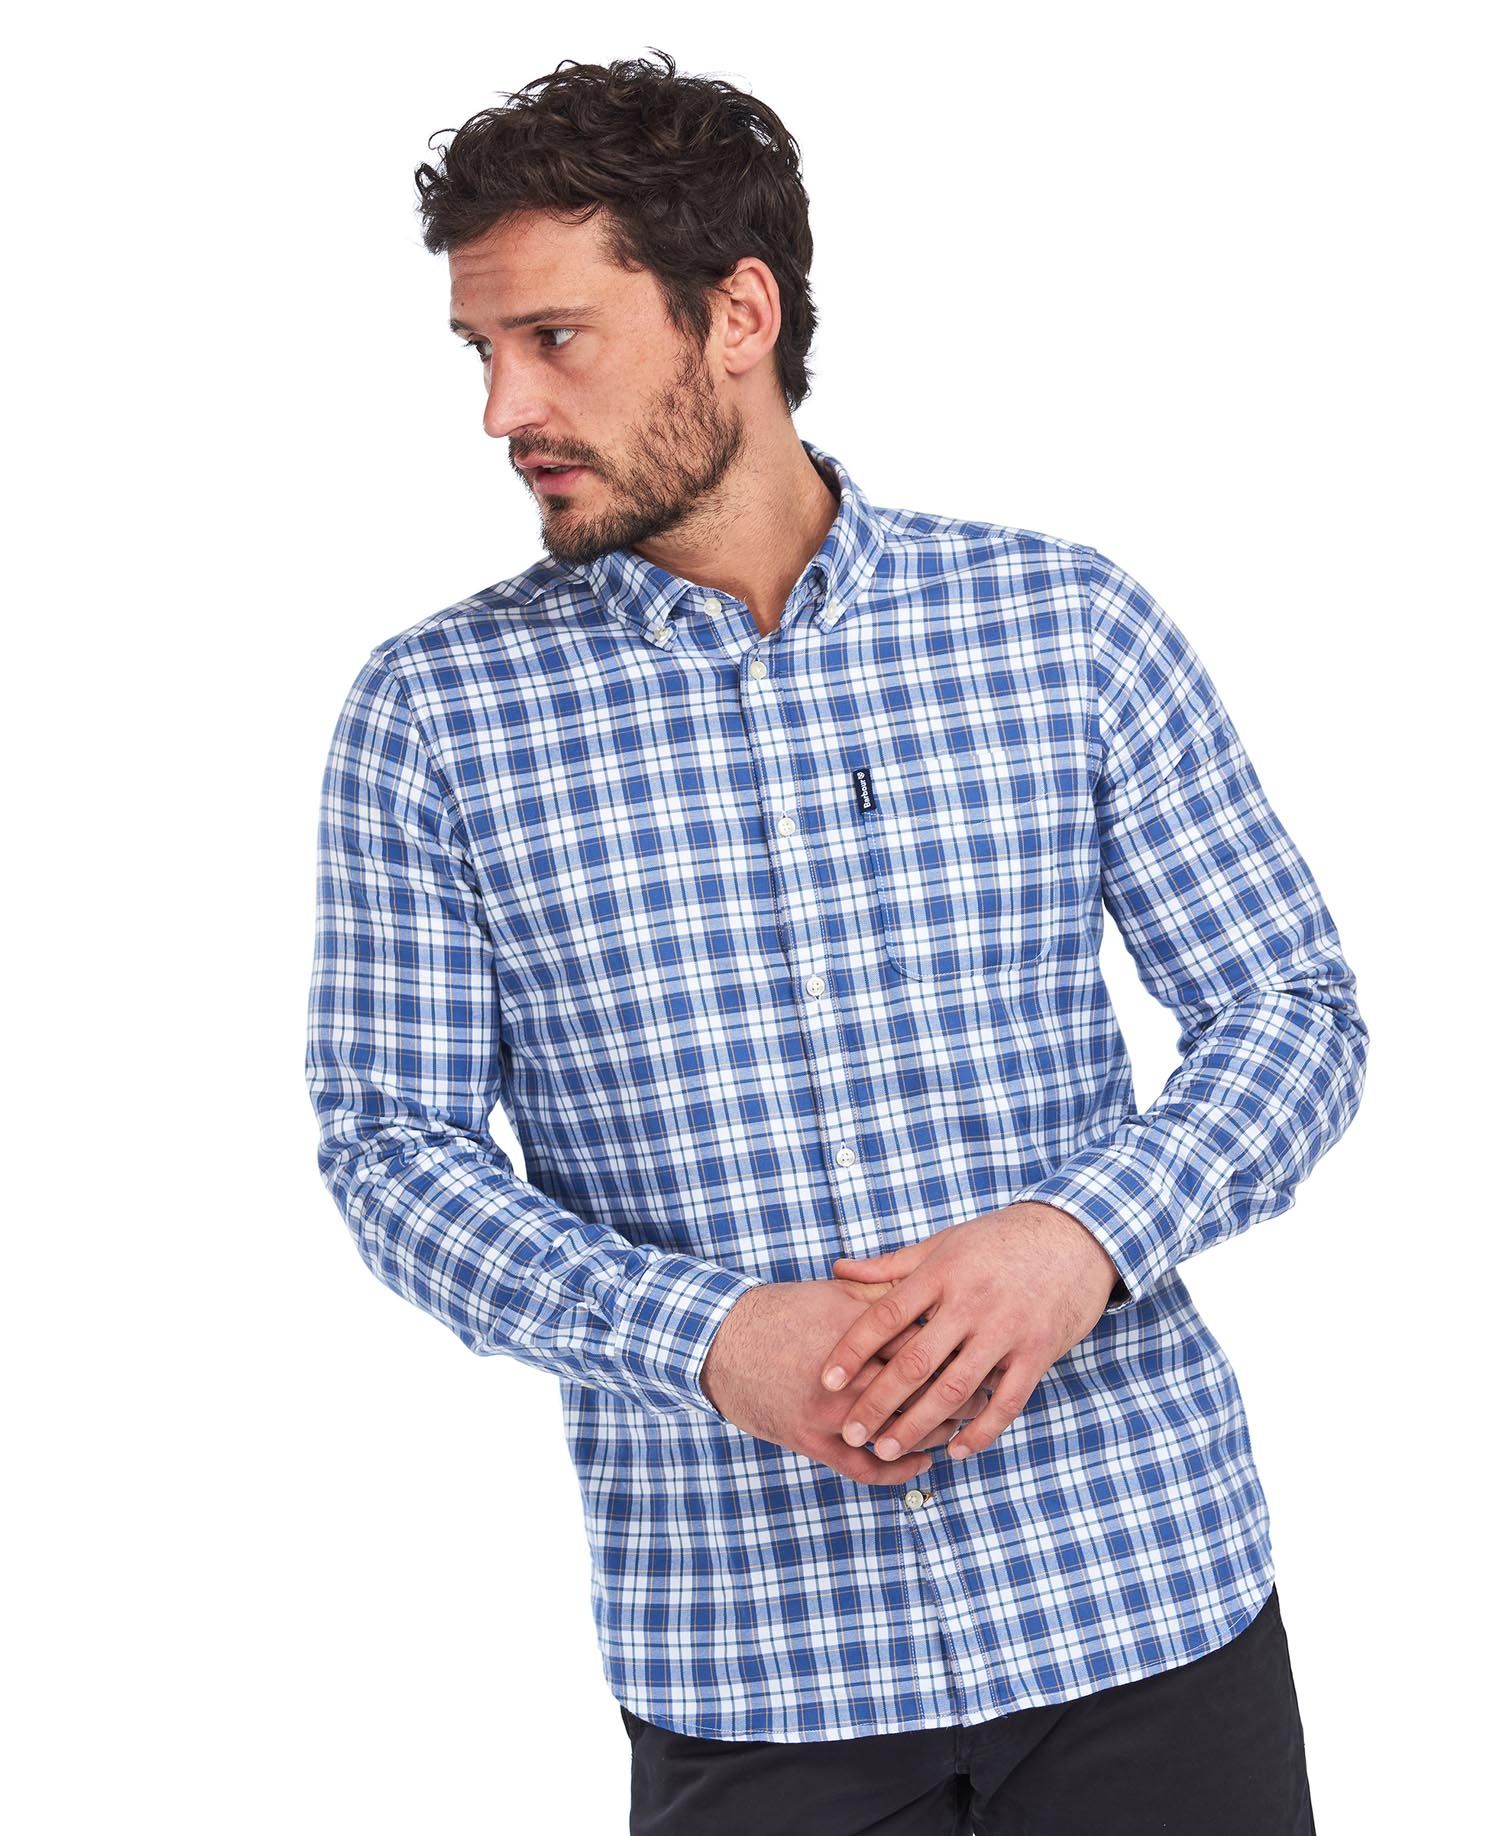 Highland Check 35 Tailored Shirt in White